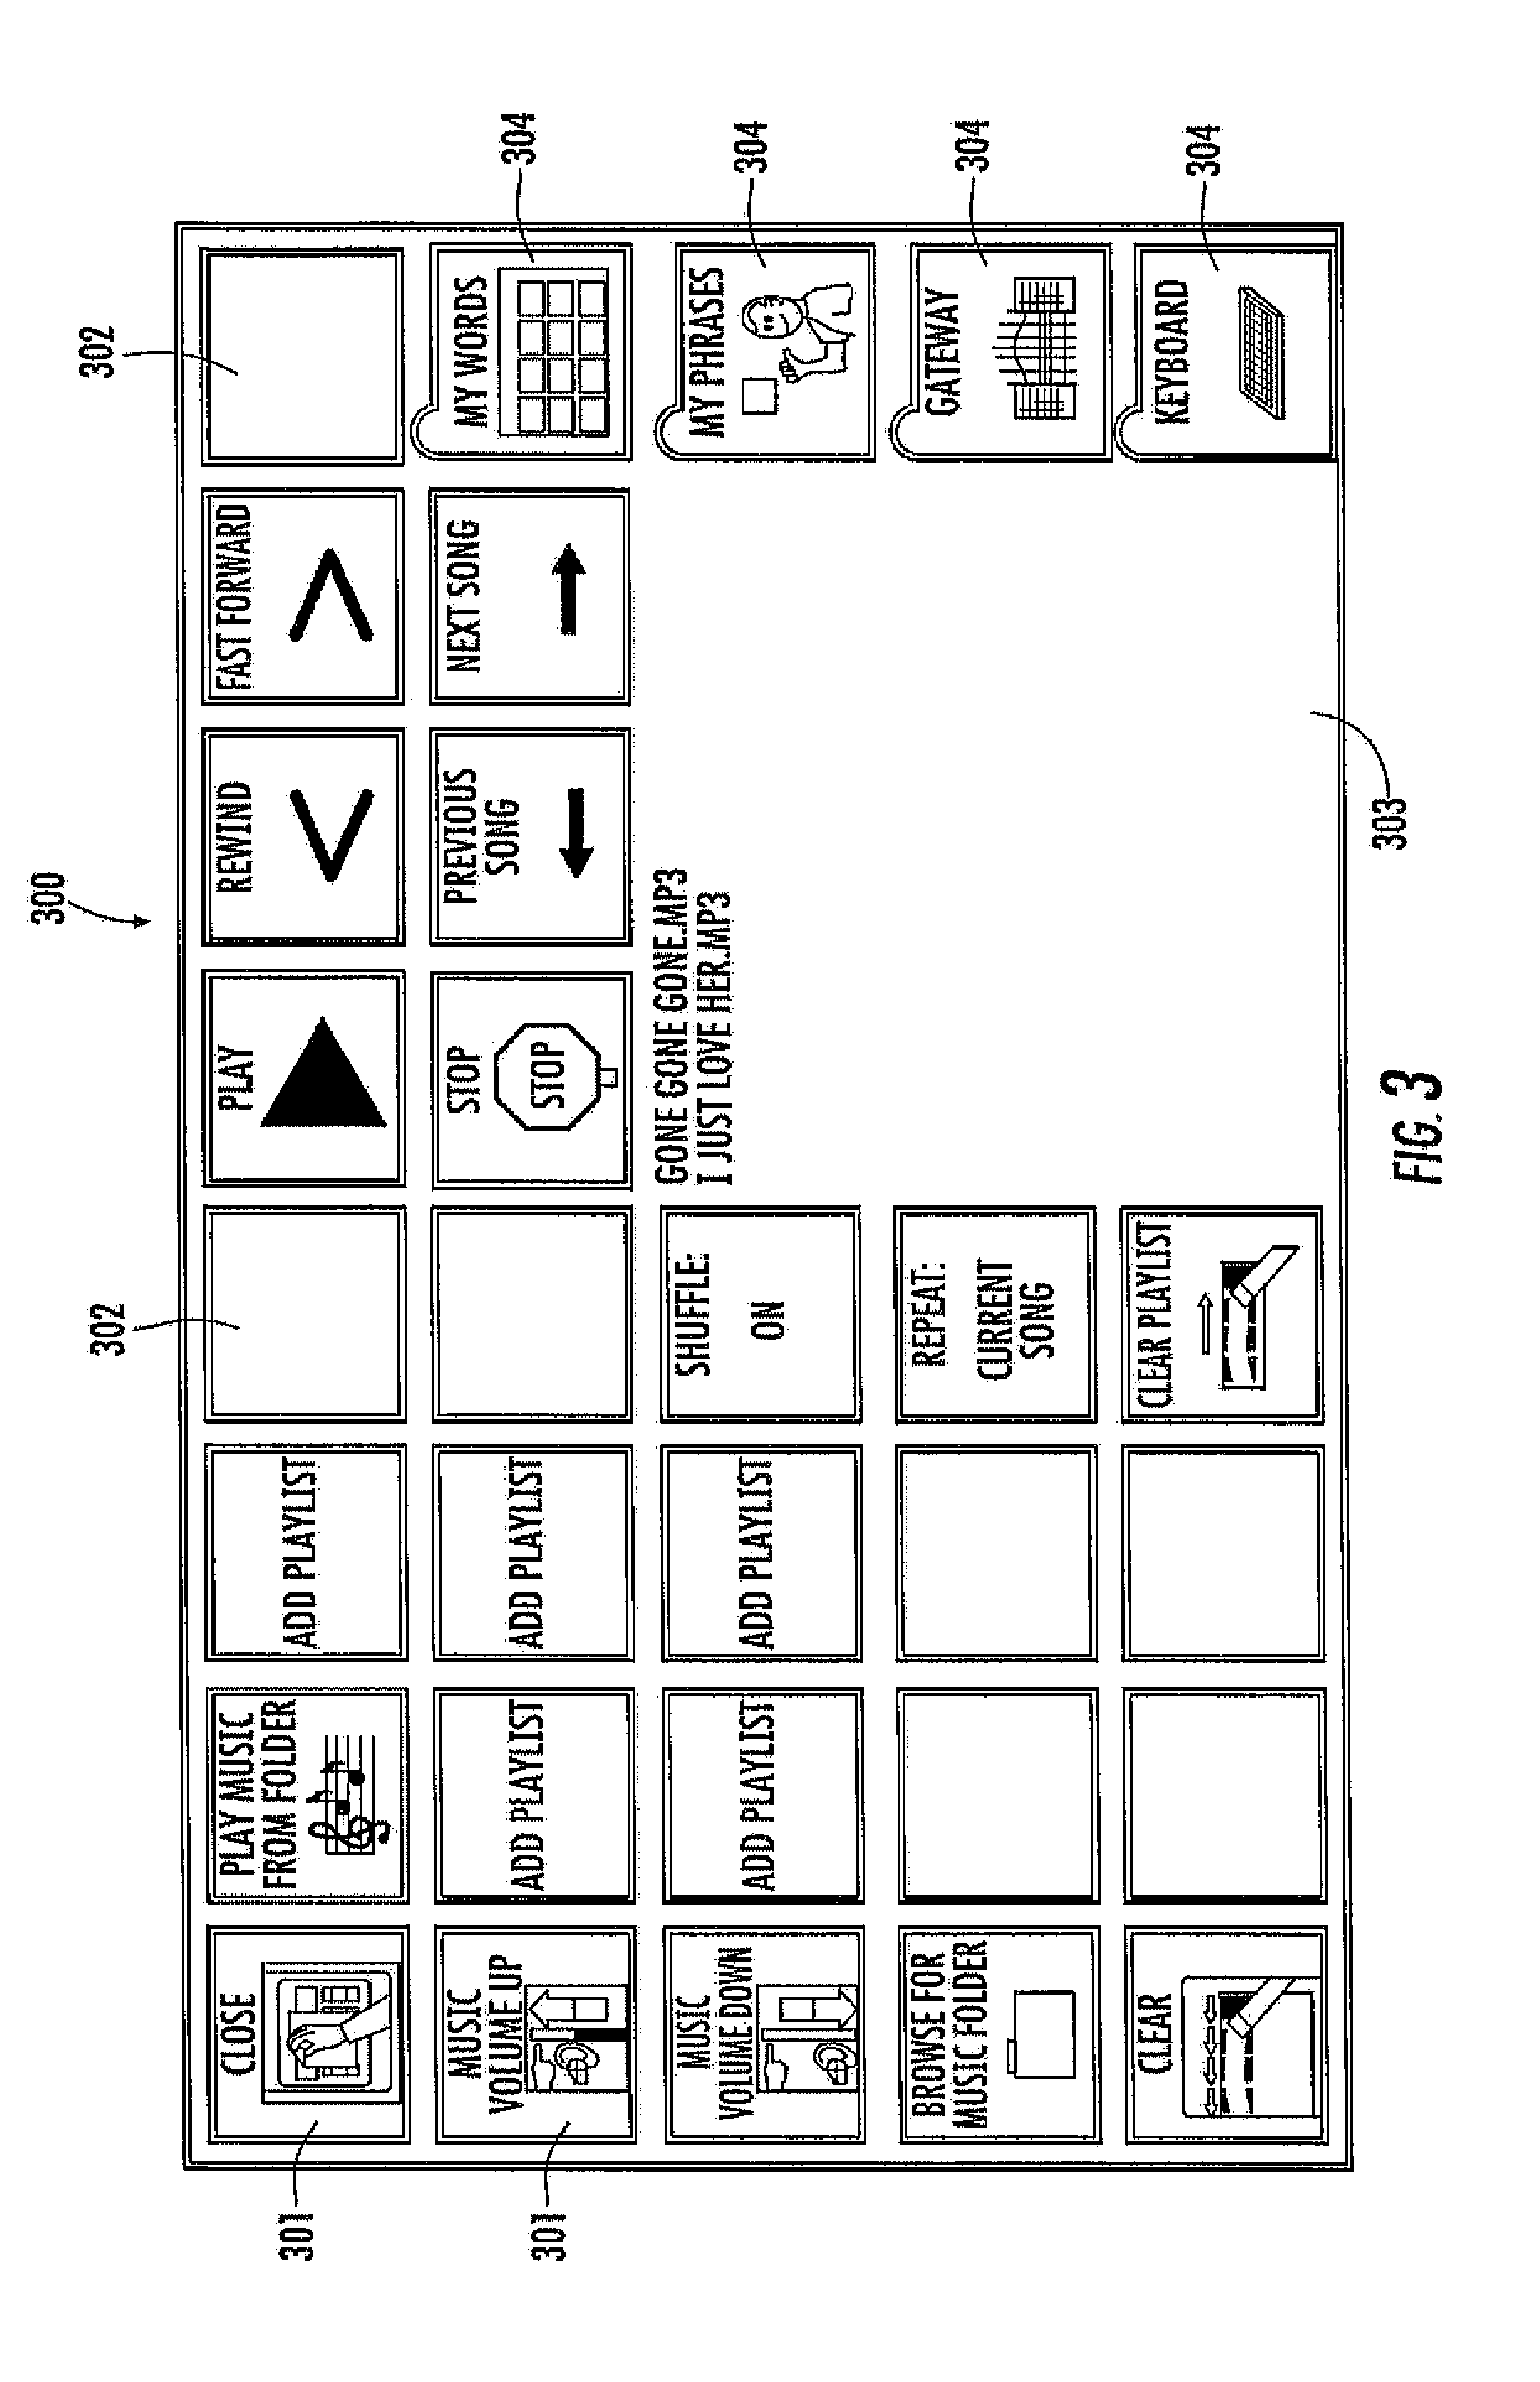 System and method of creating custom media player interface for speech generation device